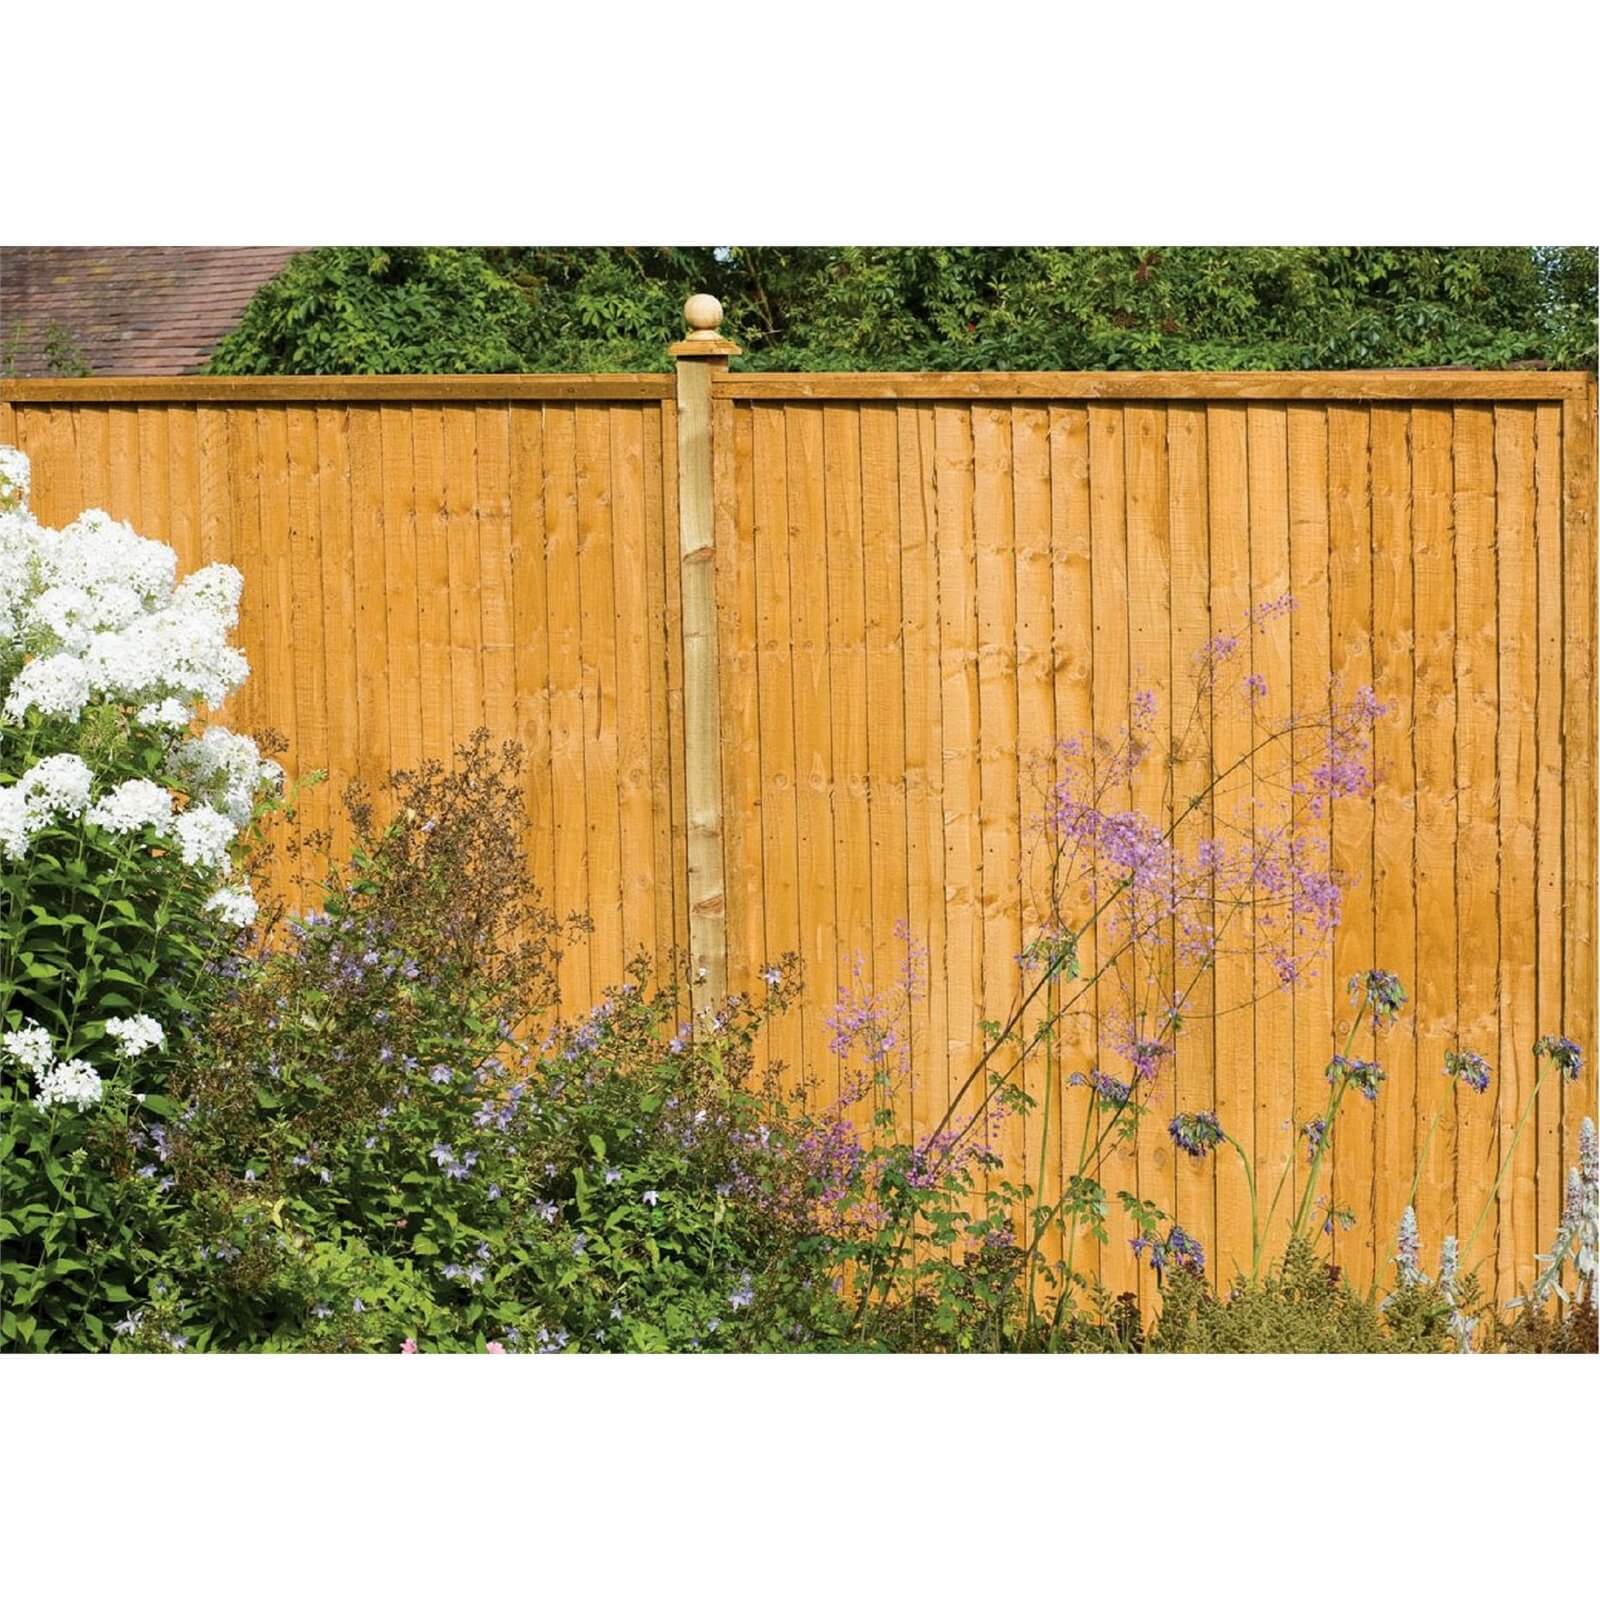 Forest Larchlap Closeboard 0.9m Fence Panel - Pack of 5